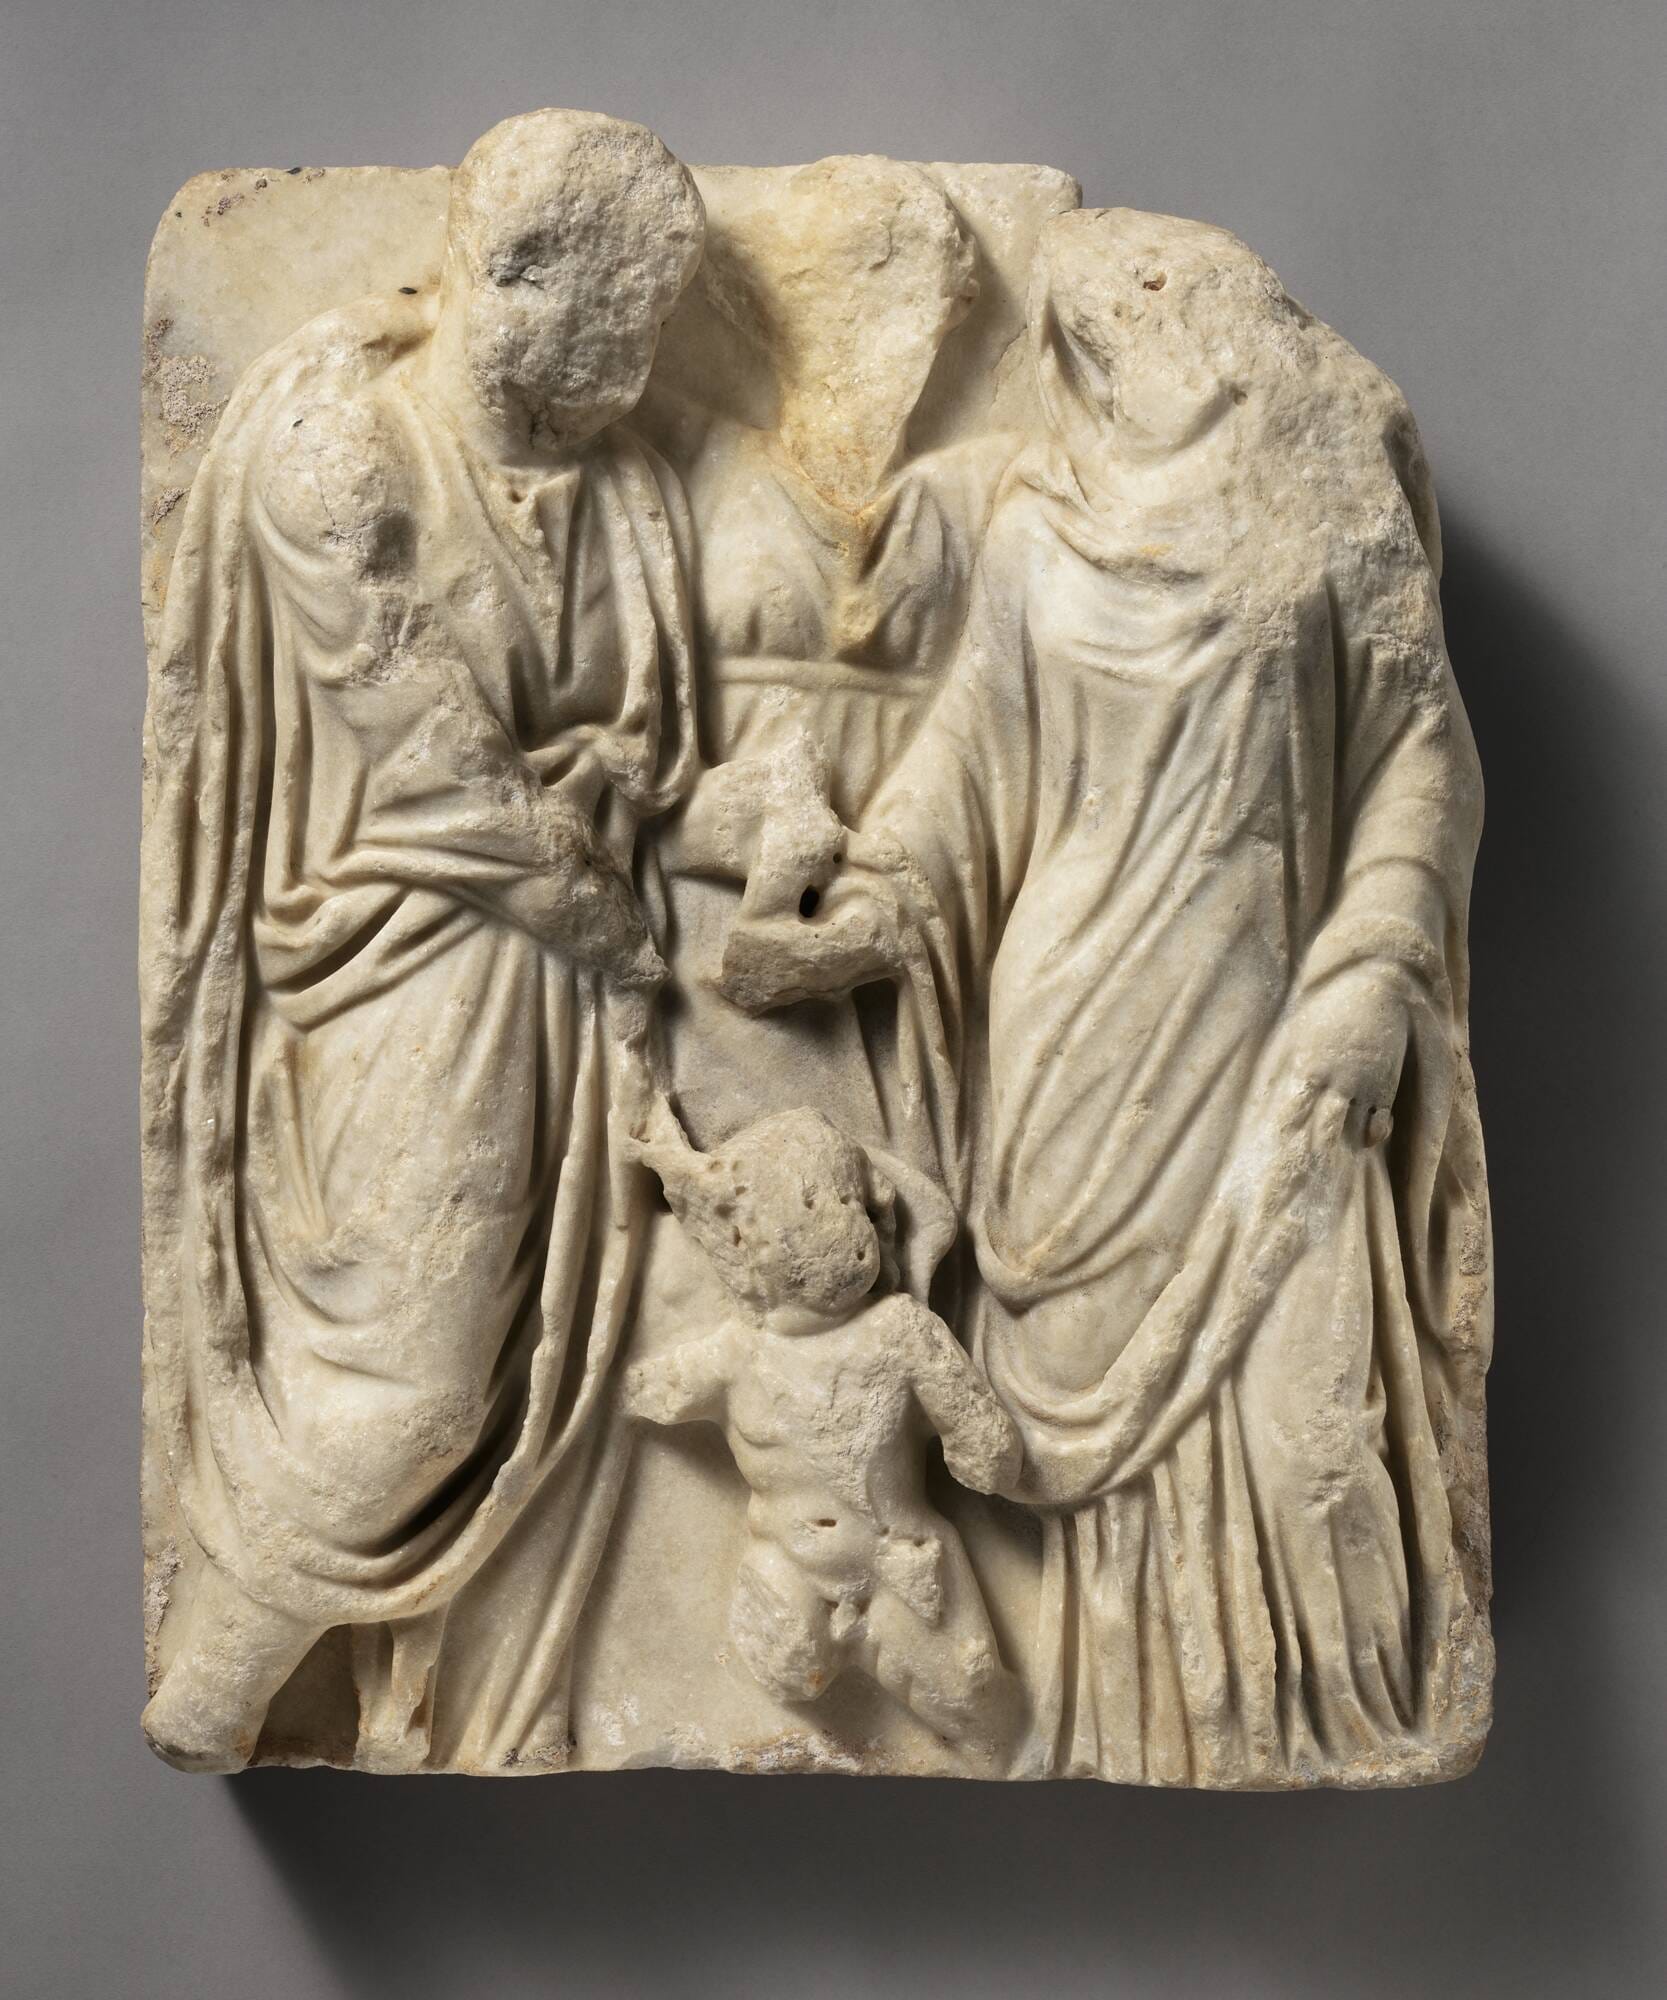 Marble sarcophagus fragment: Marriage scene of a man and a woman clasping hands, a figure between them and Eros below.